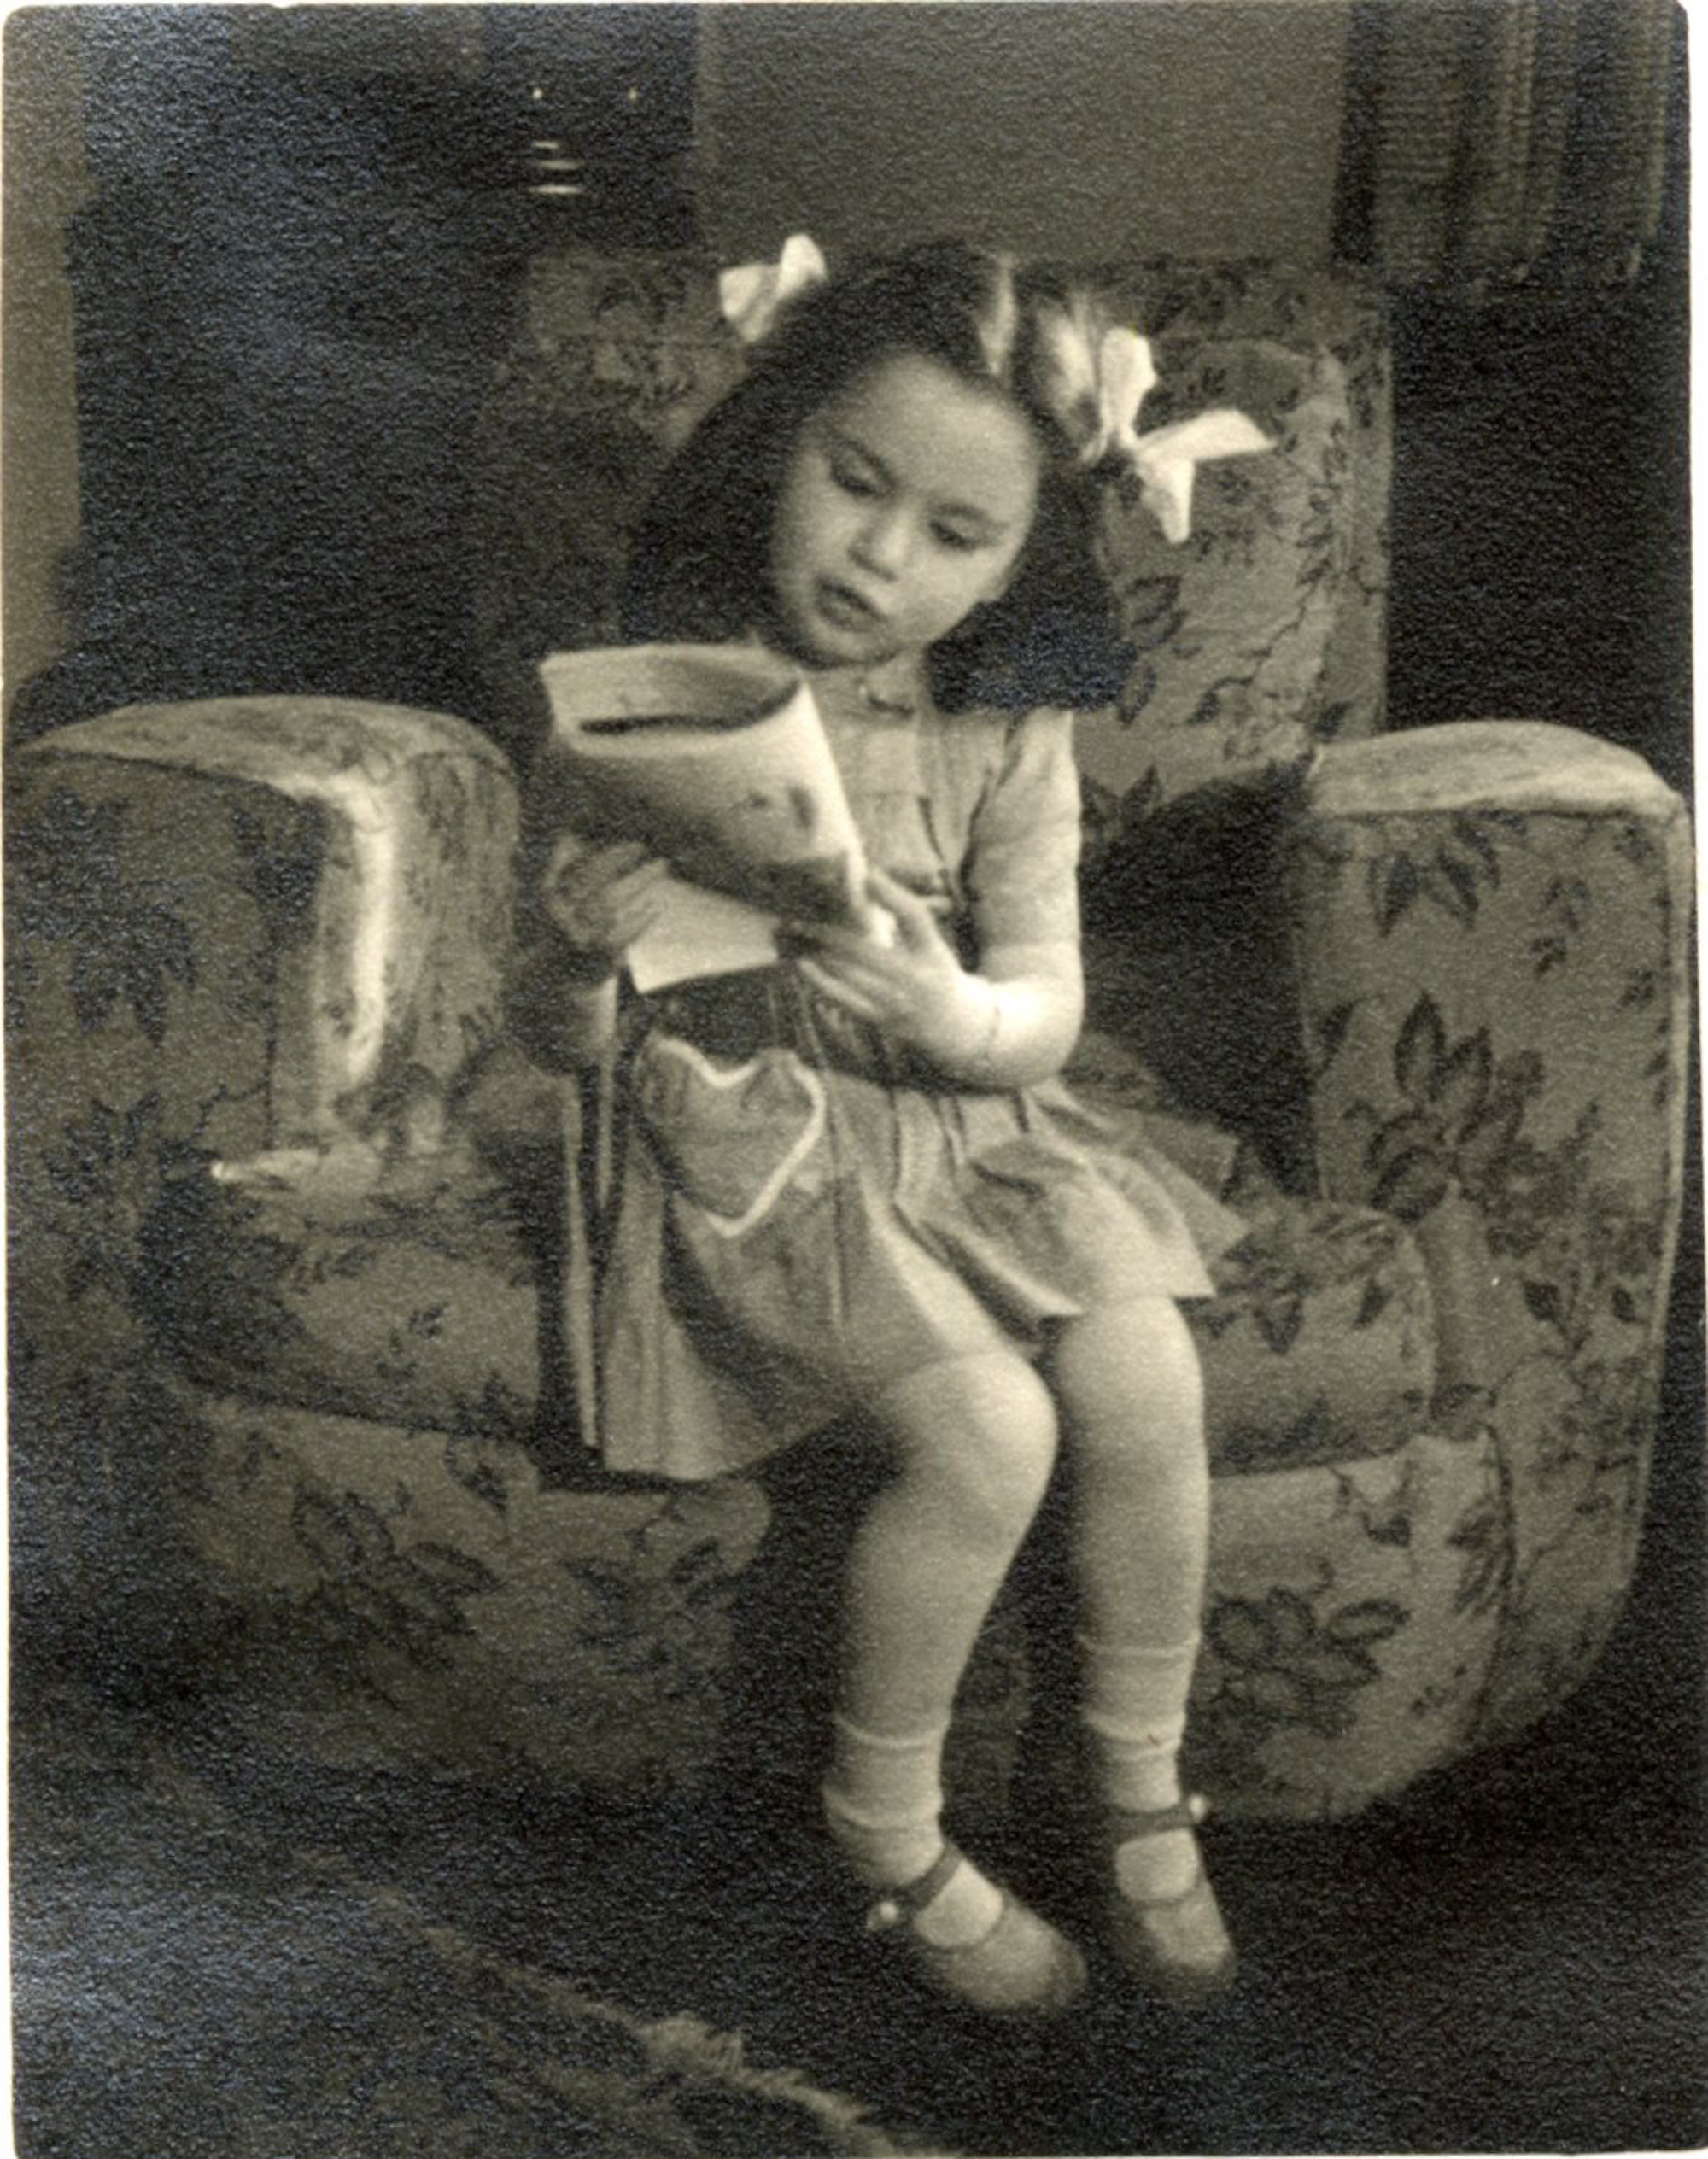 Me (with more bows in hair) sitting in a big armchair with a magazine in my hands,1945